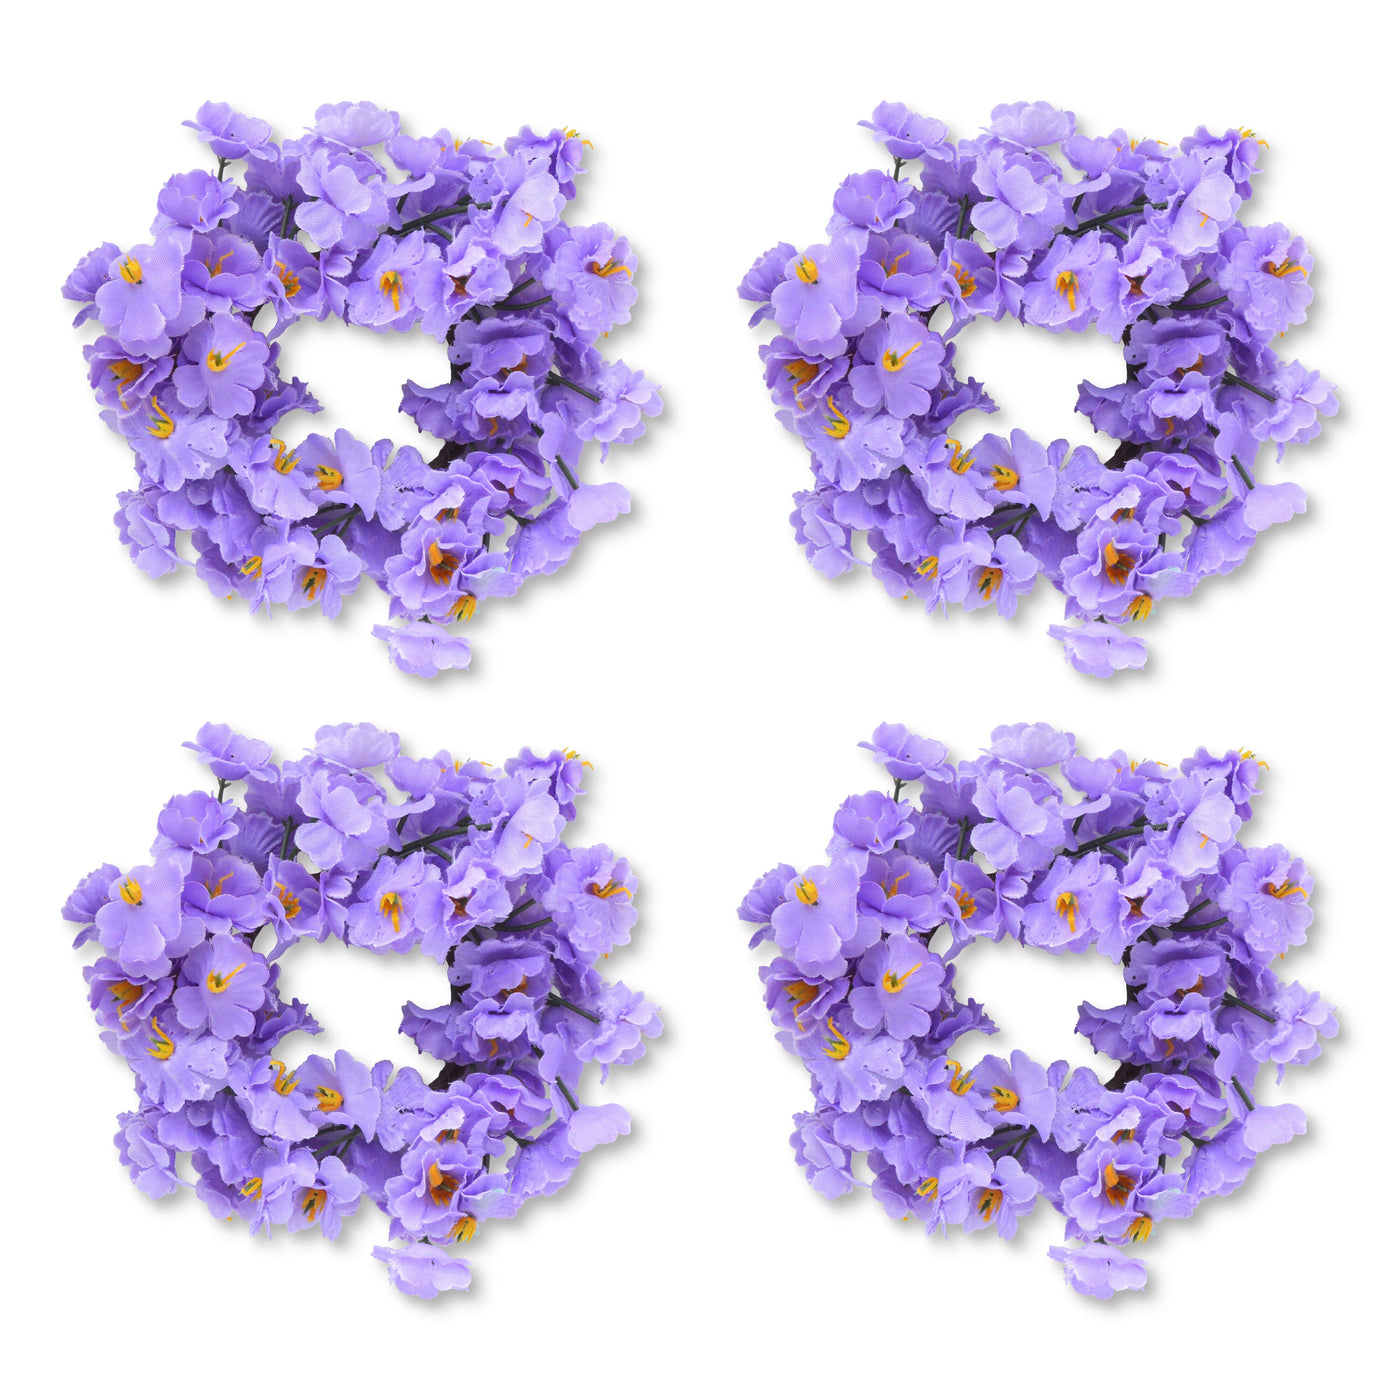 Violet Napkin Rings (4) Psychedelic 60s Easter Table Decor Chefanie 